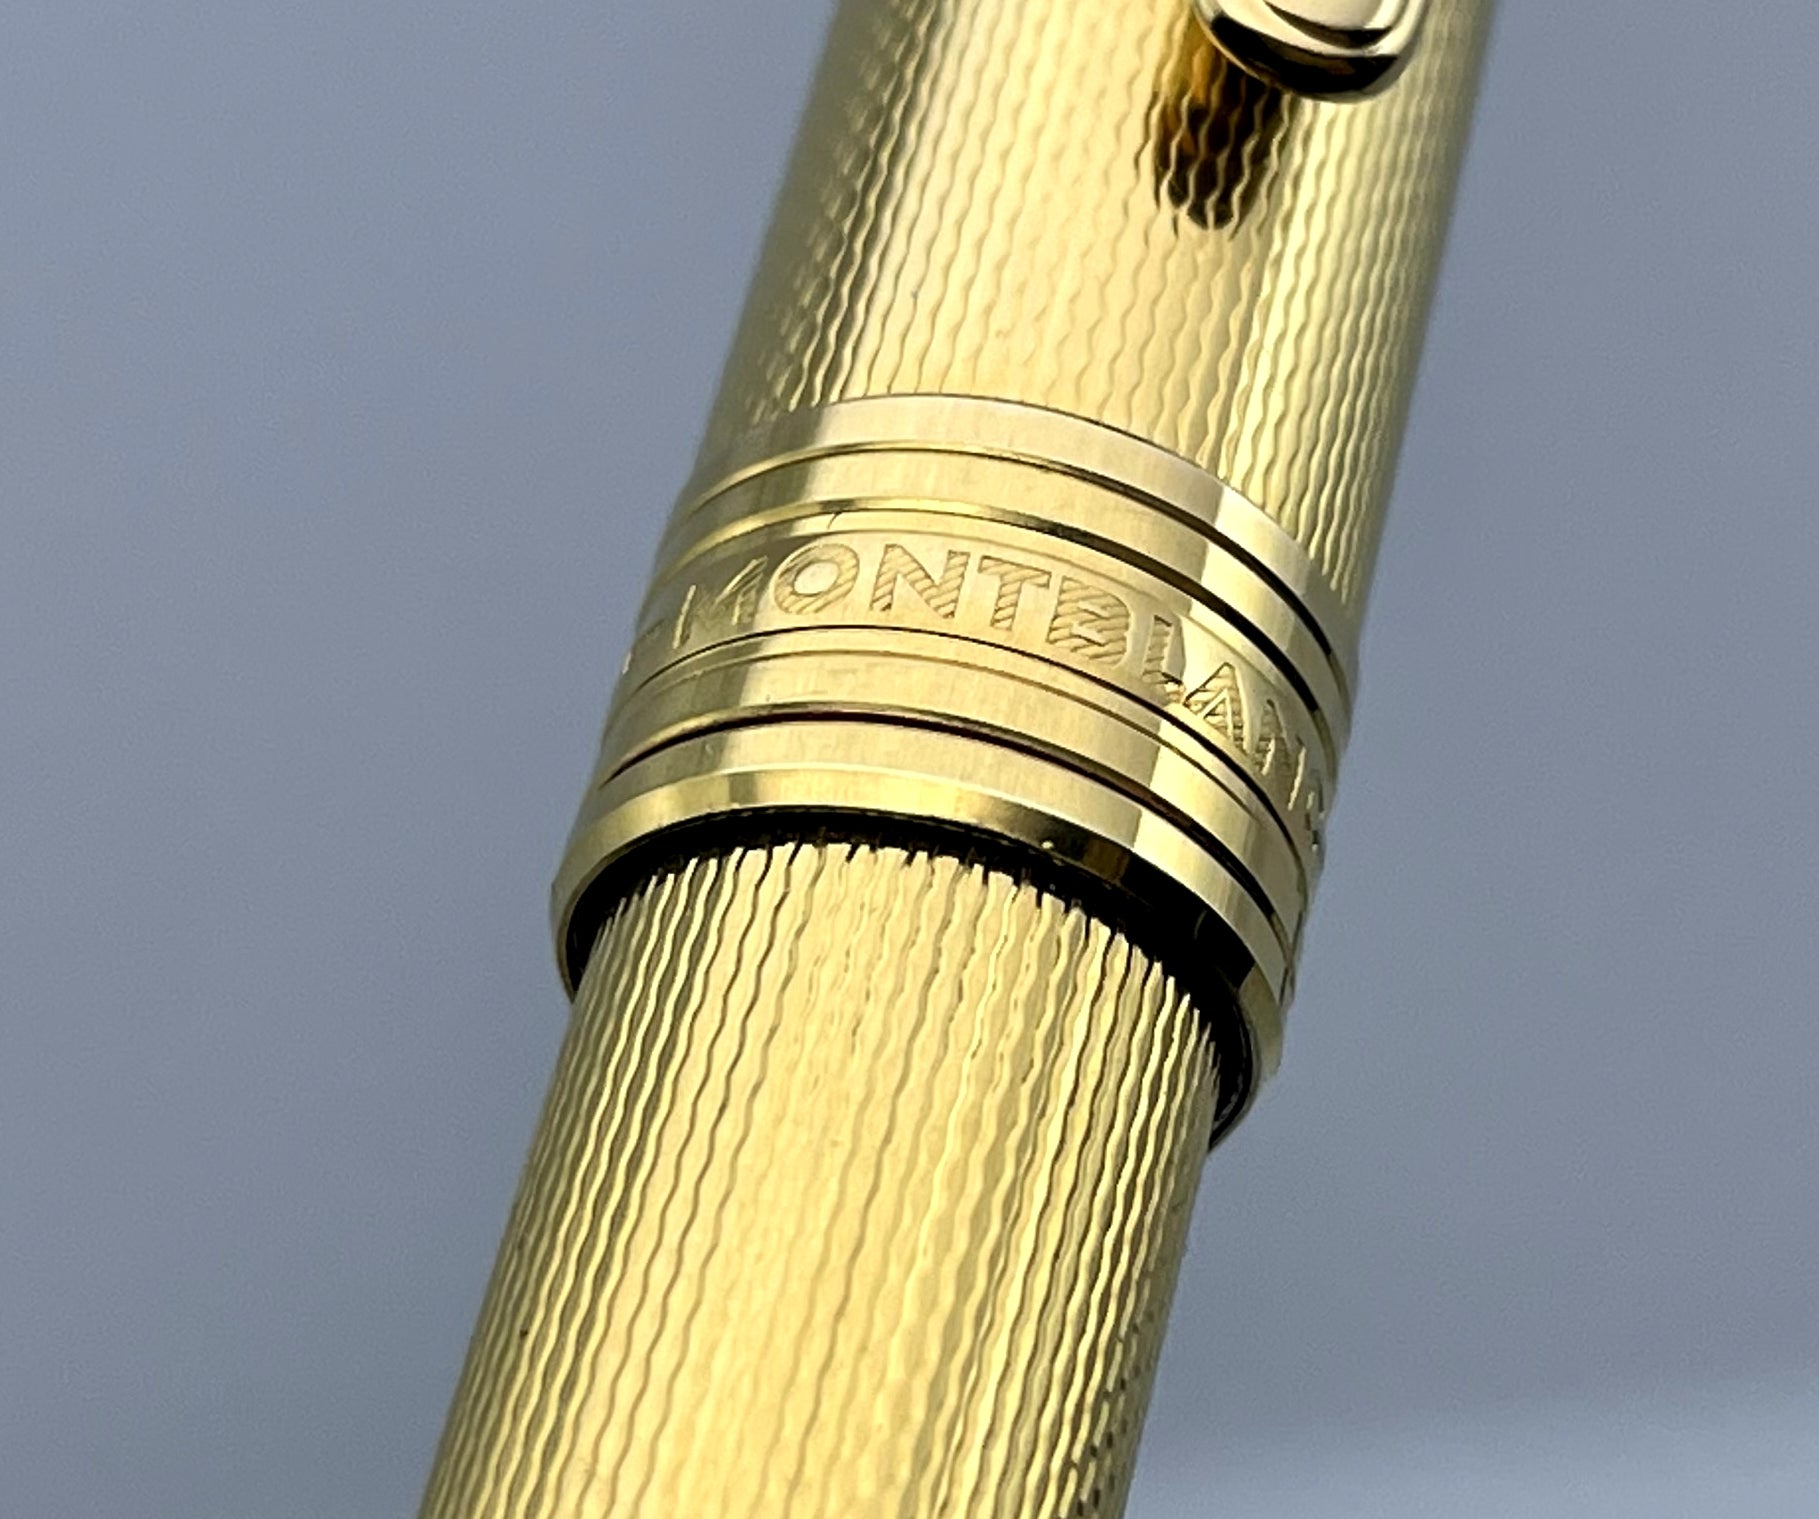 Montblanc Meisterstuck 144 Gold Barley Fountain Pen - West Germany